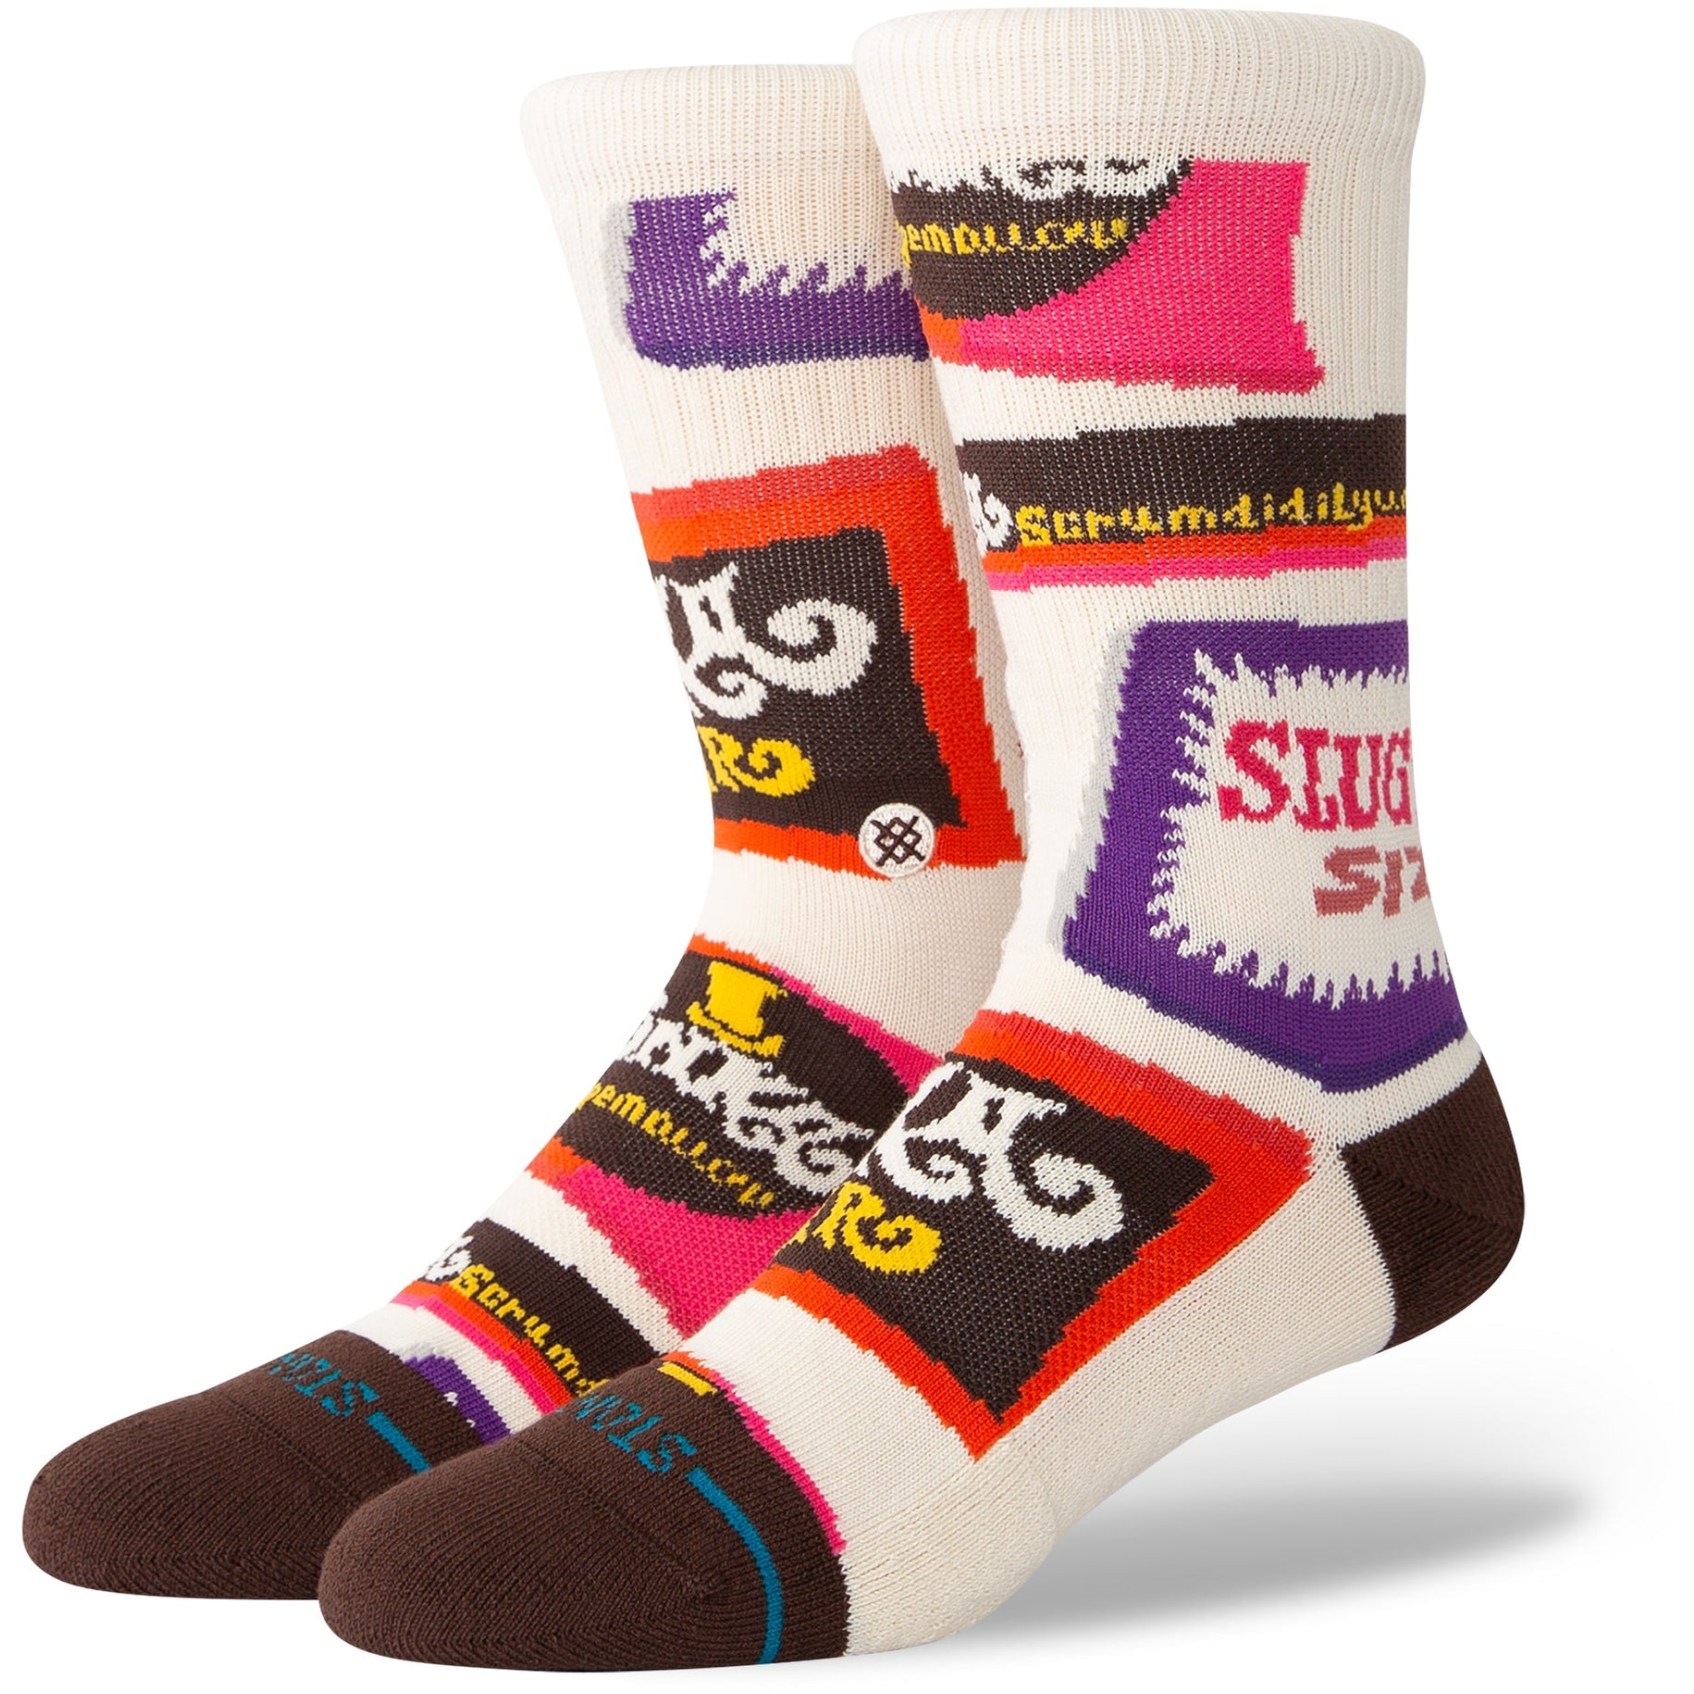 Picture of Stance Wonka Bars Socks Unisex - brown